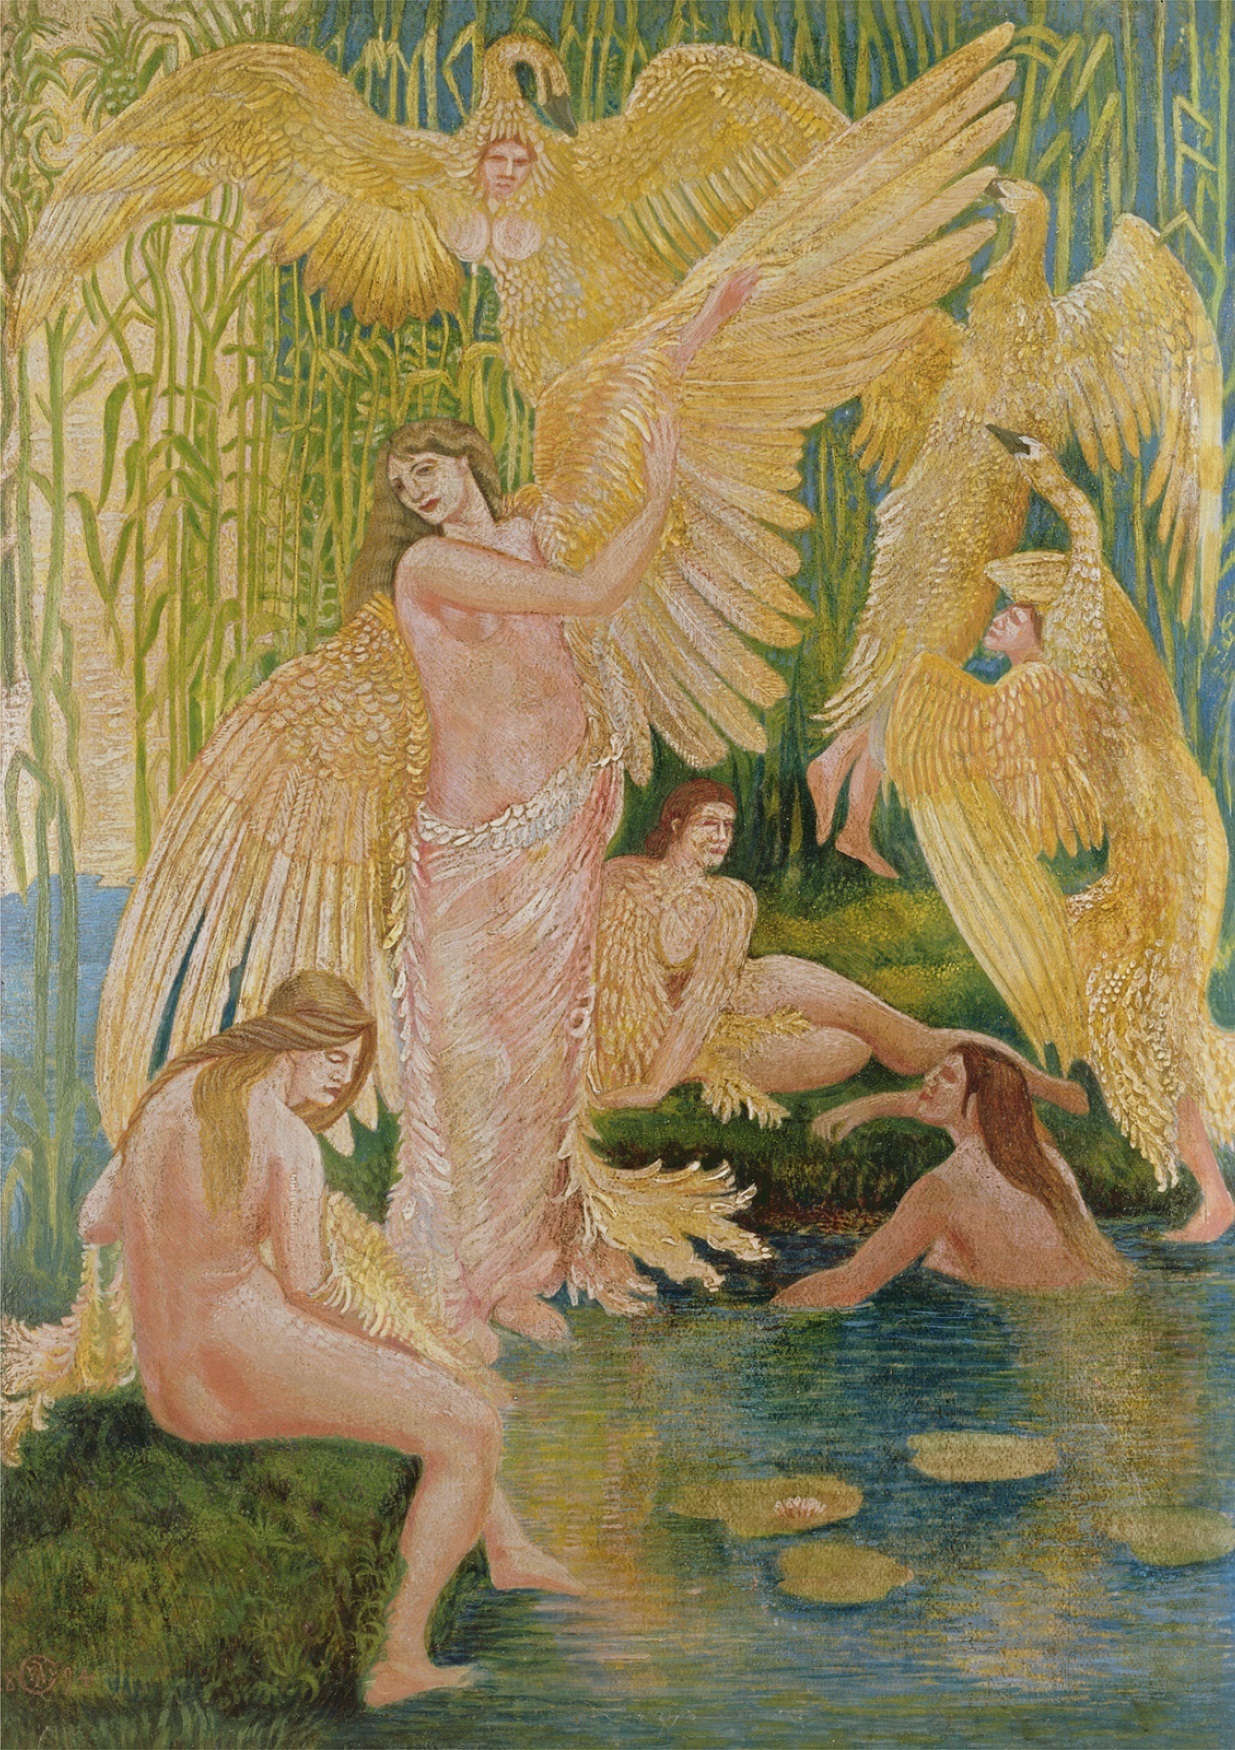 Several maidens rest and play in a swampy pond surrounded by swans and plants.